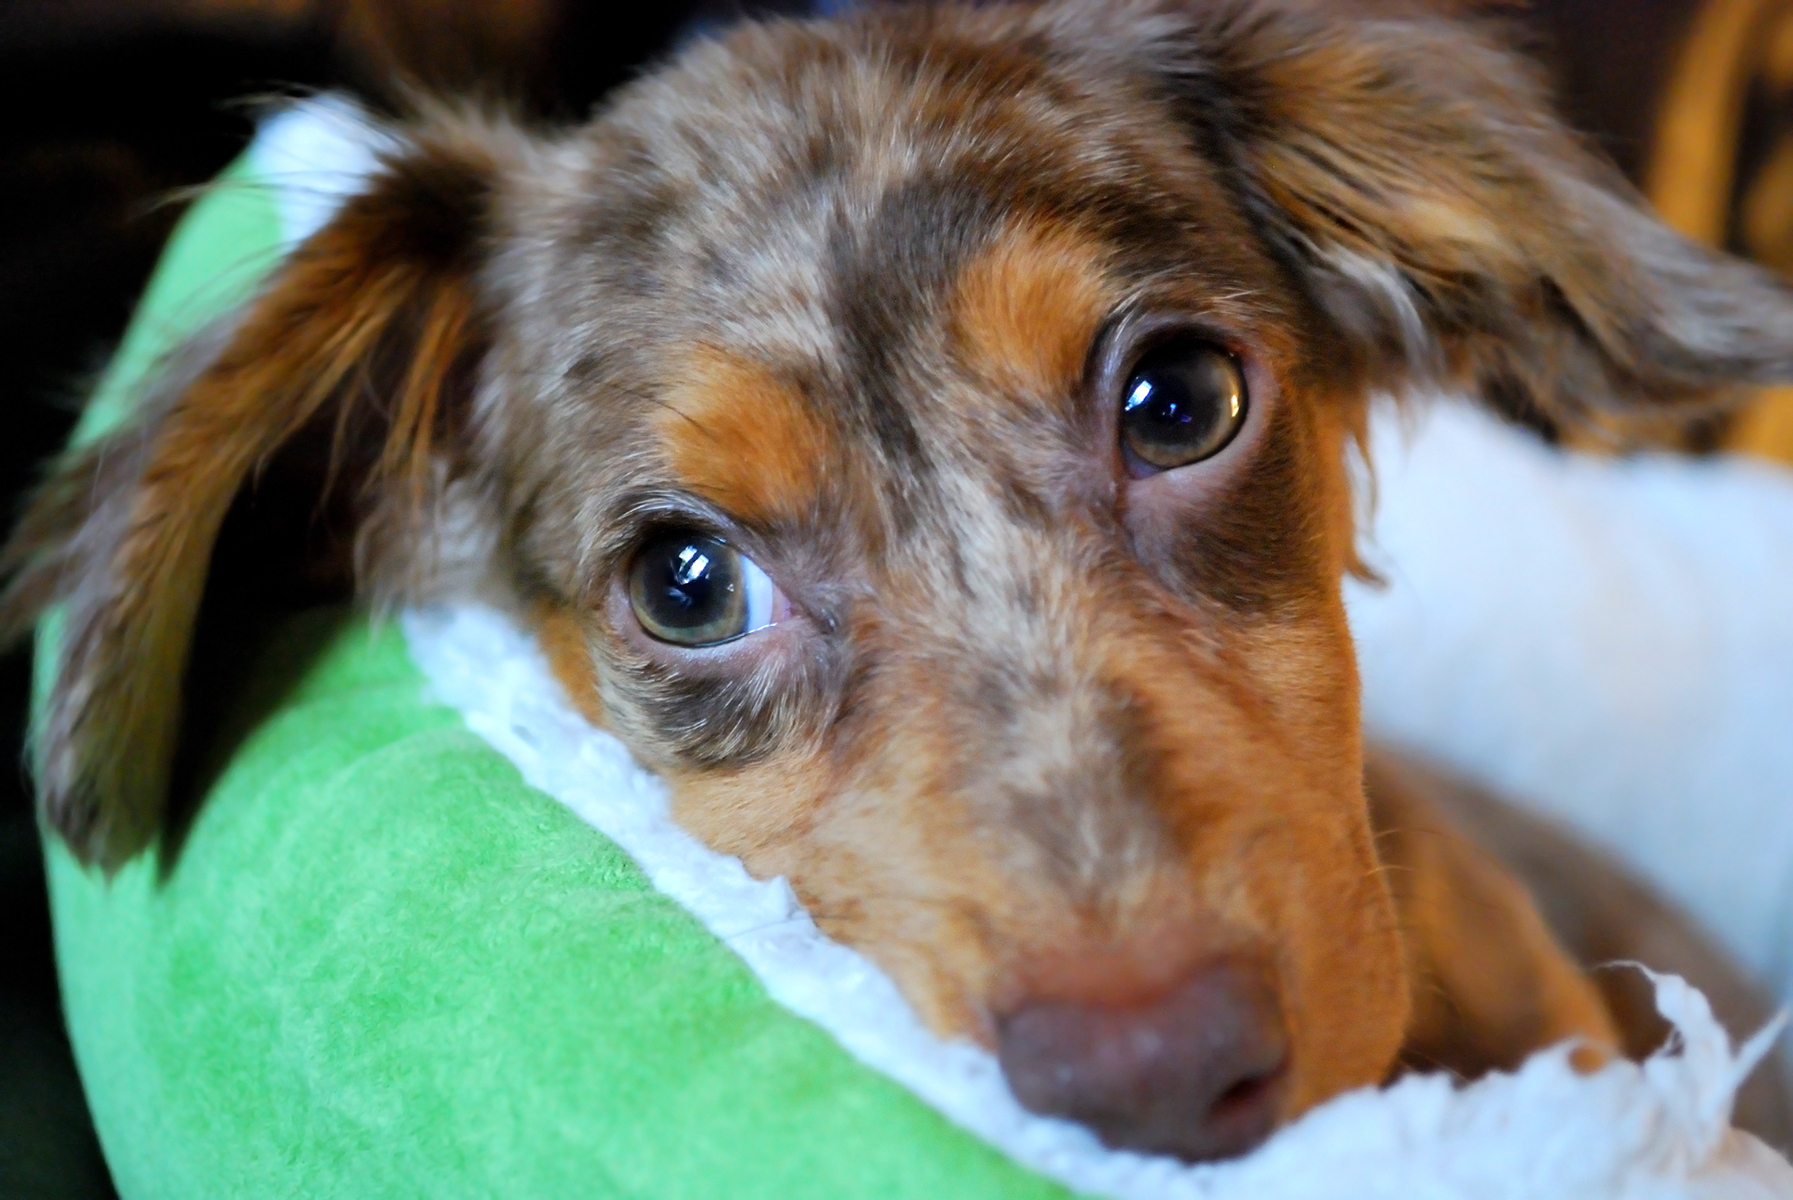 The Chiweenie dog is one of the cutest mixed breeds